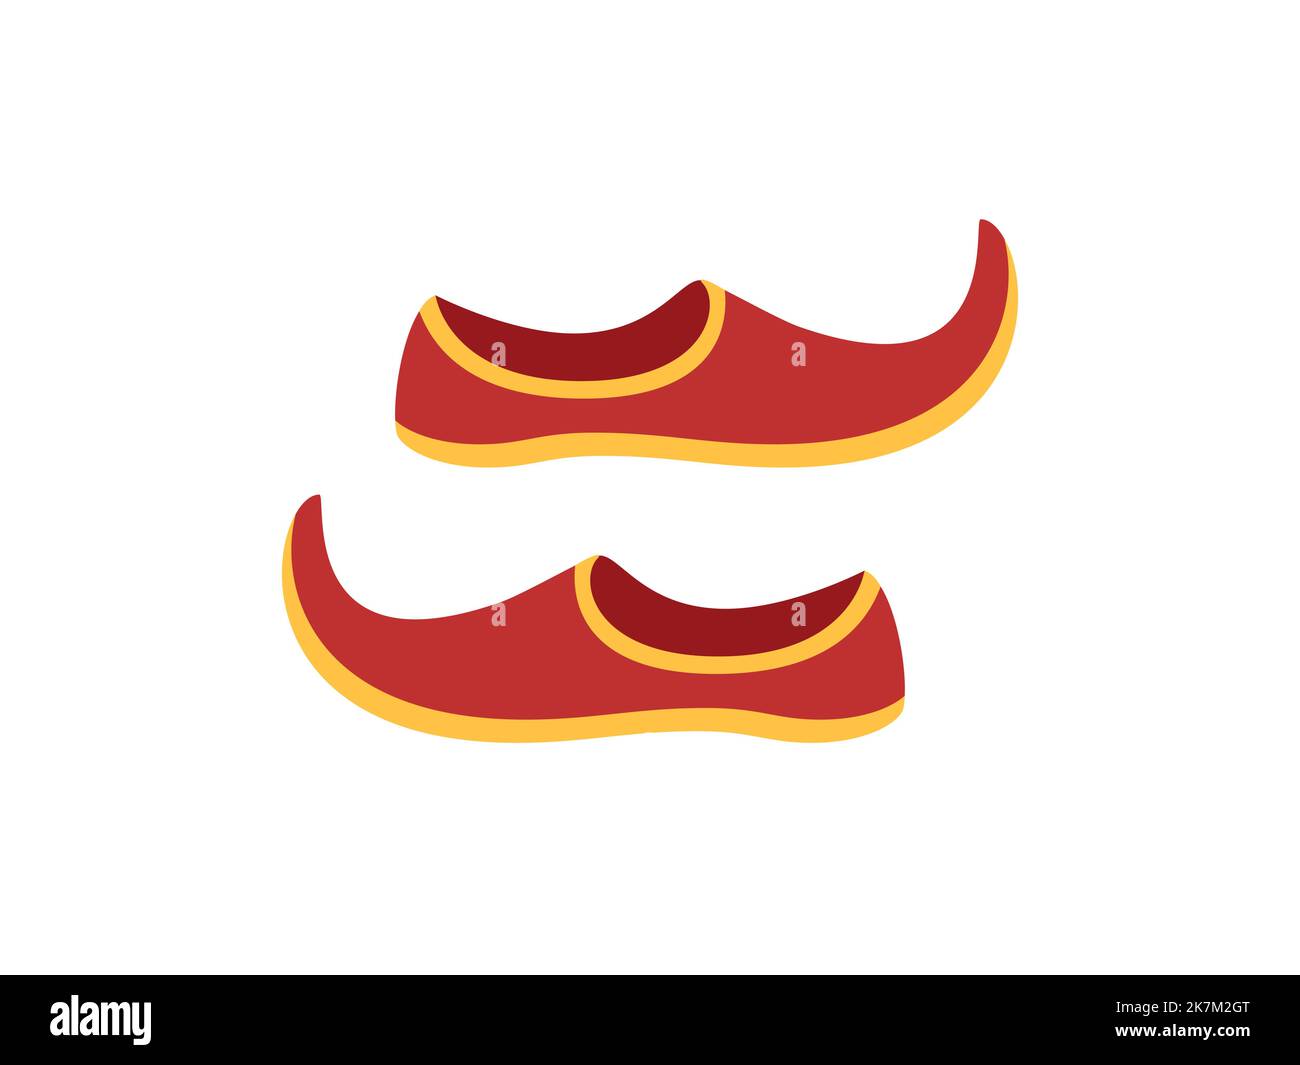 Arabian khussa footwear vector icon illustration on white isolated background Stock Vector